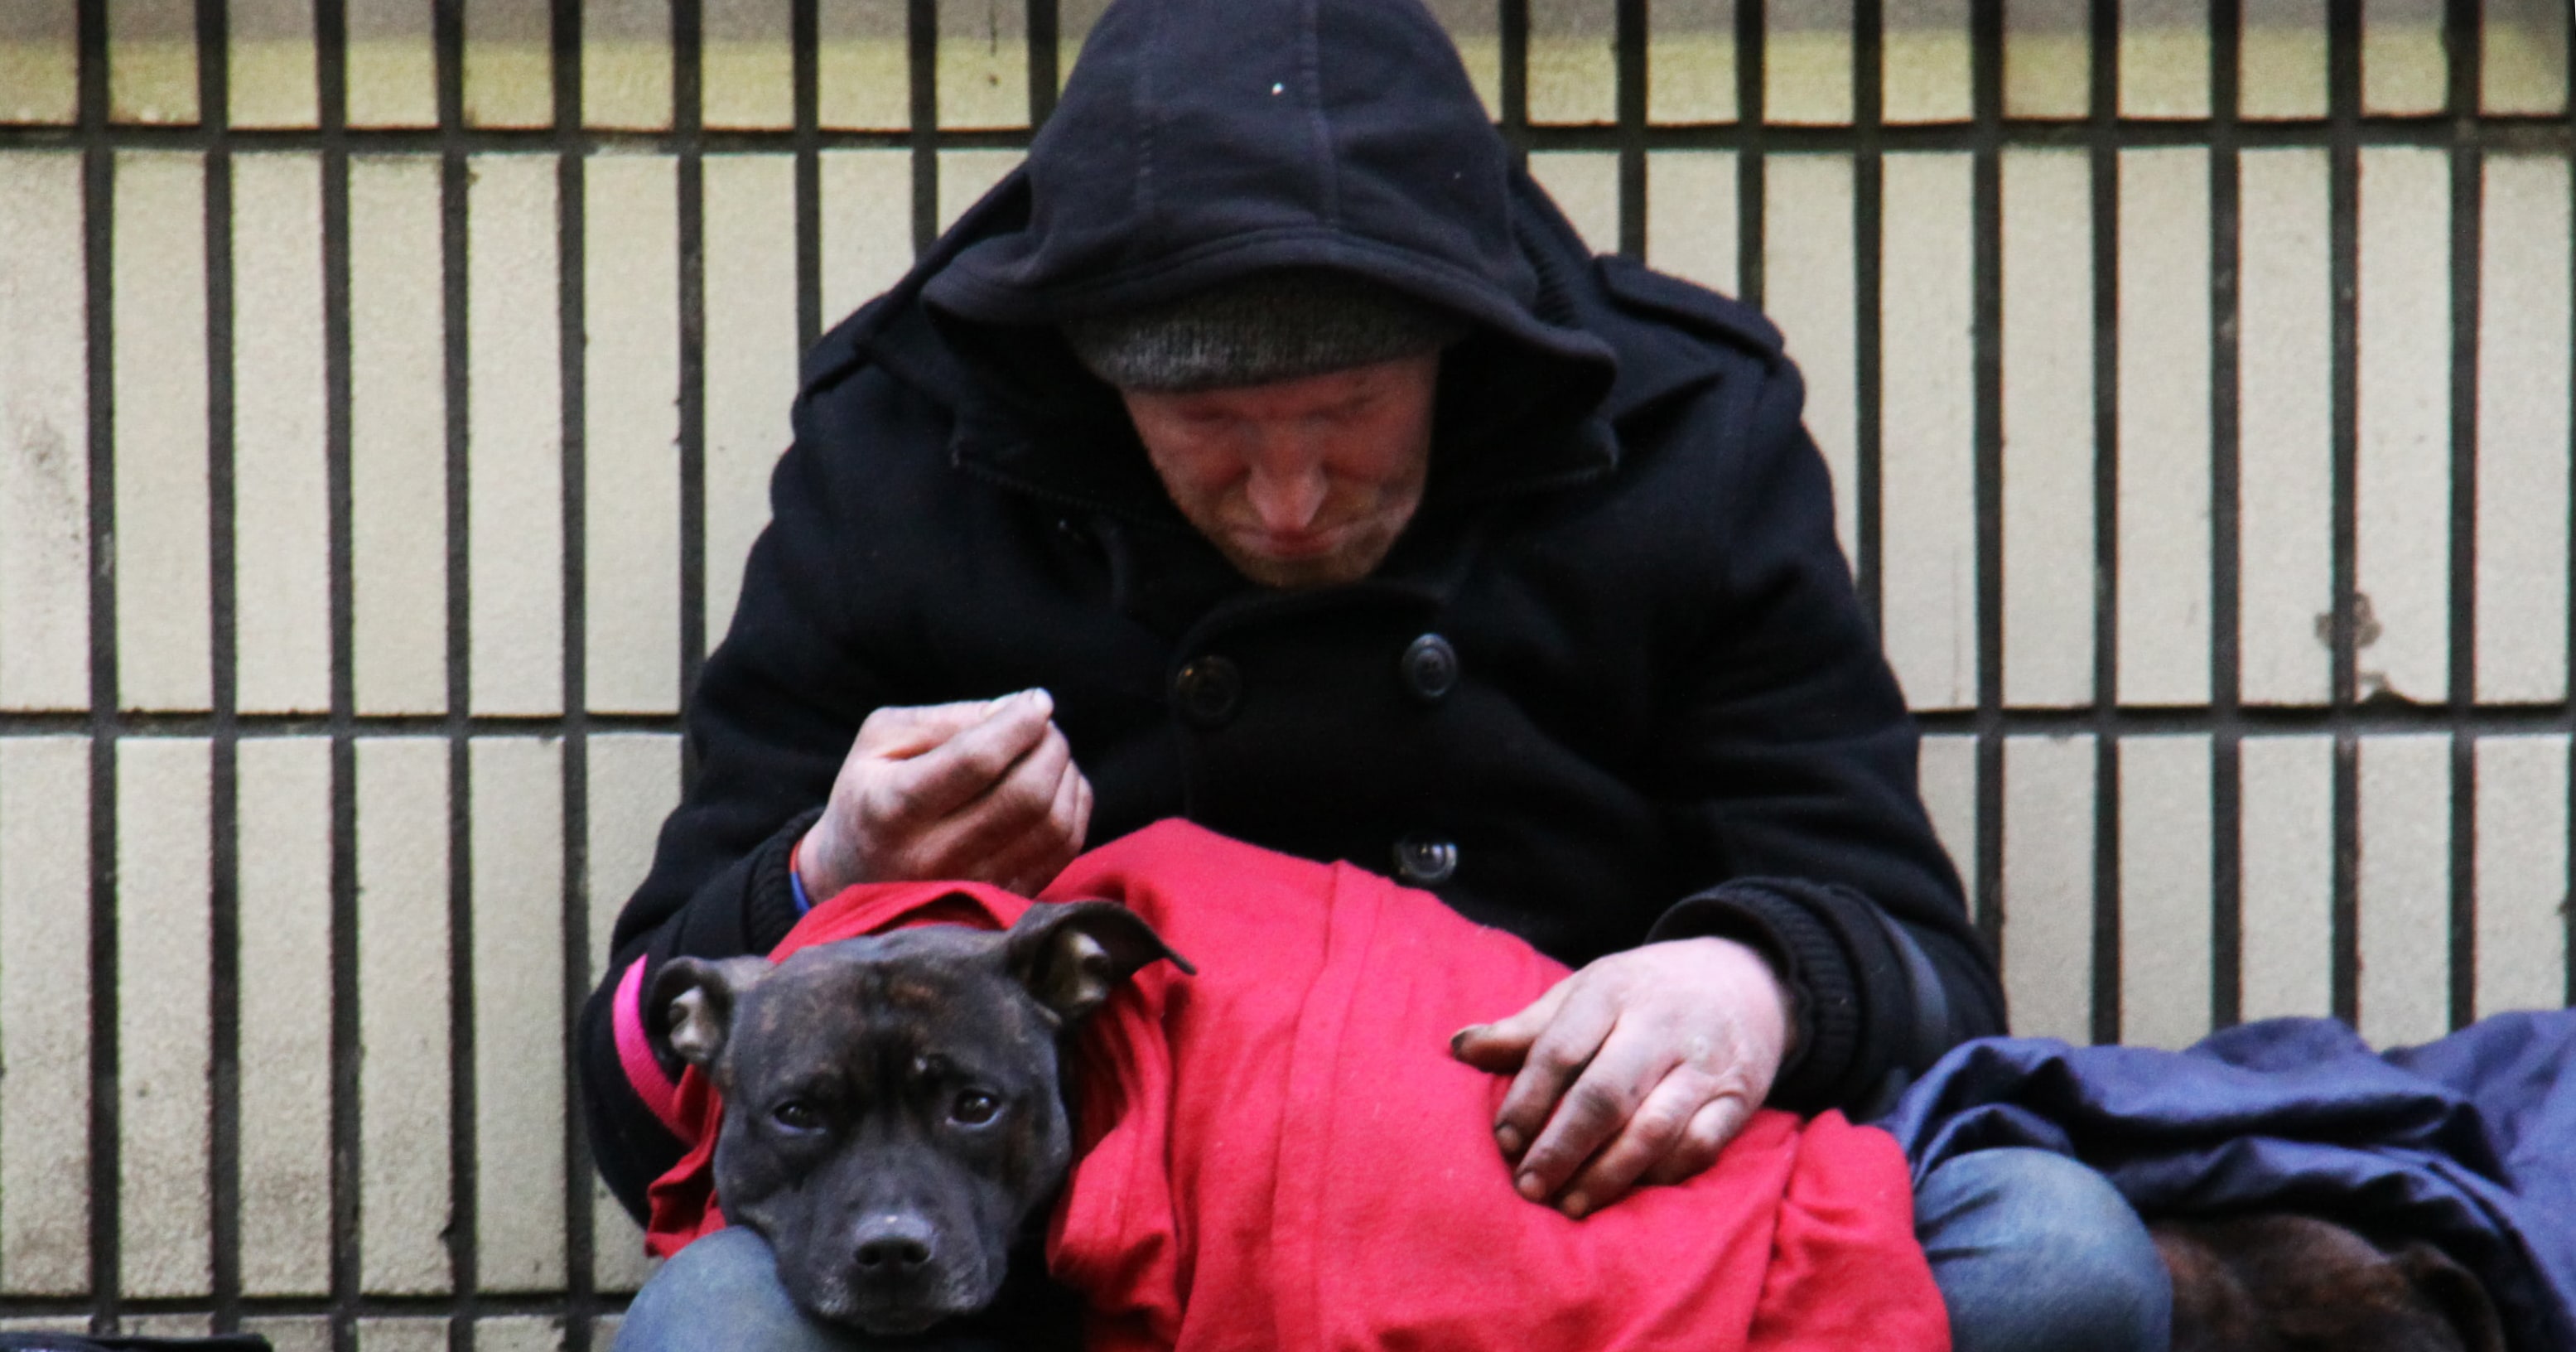 Depressed Homeless Man in black, hooded, jacked with black dog in red blanket laying.